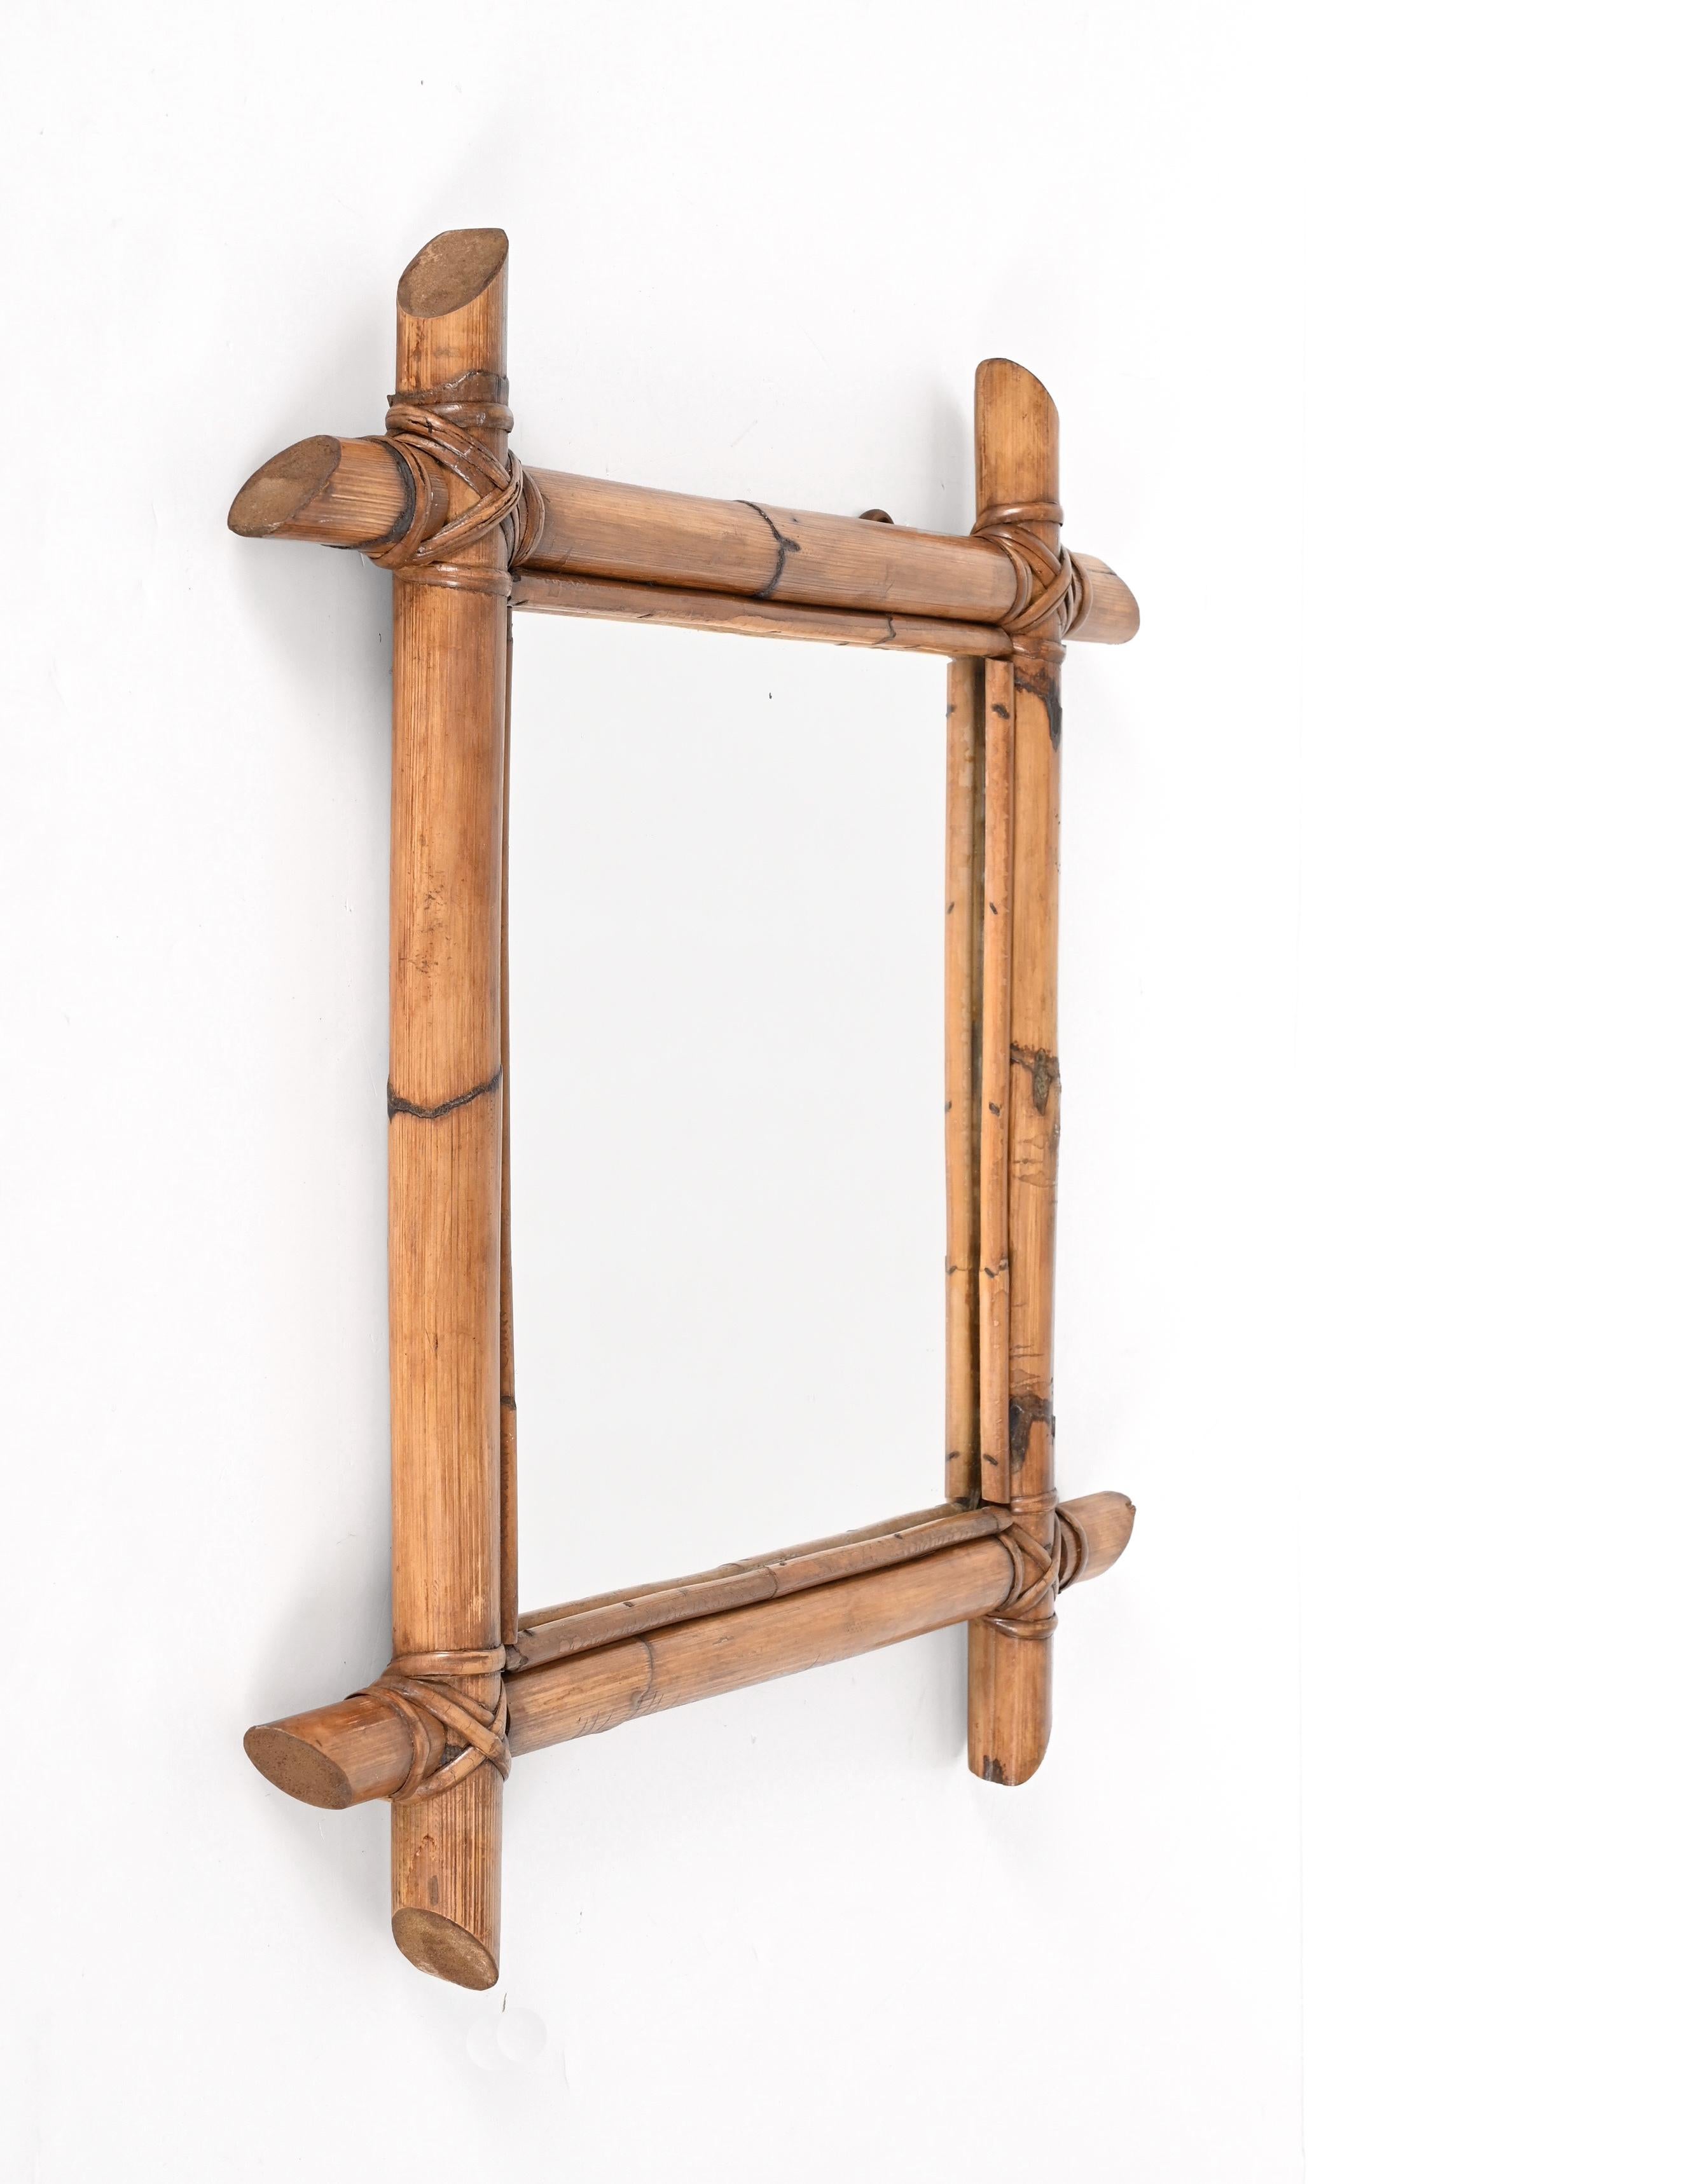 Midcentury Square Italian Mirror with Bamboo Woven Wicker Frame, 1950s For Sale 1